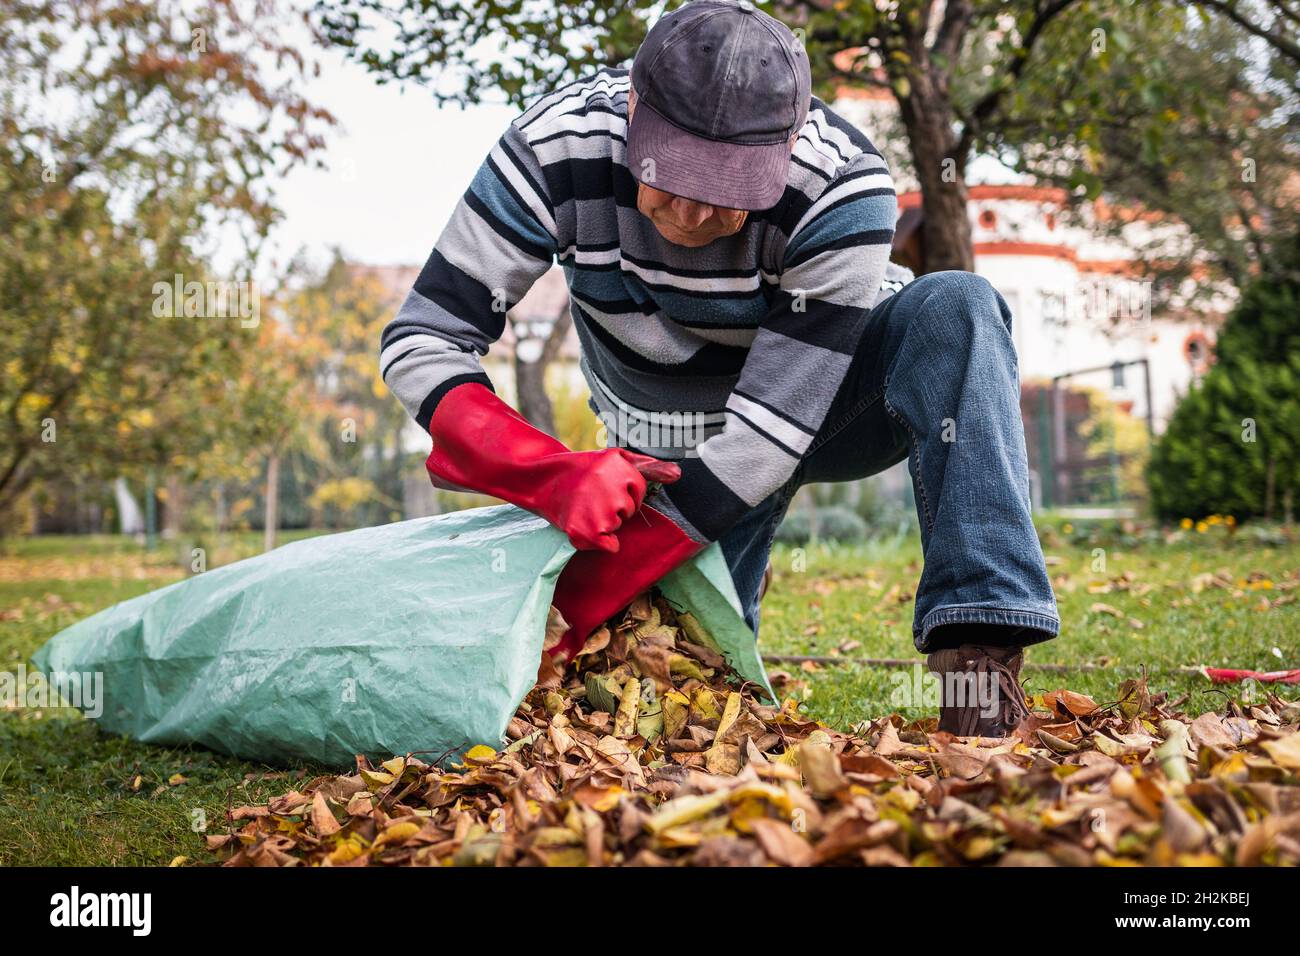 Senior man cleaning garden from fallen leaves. Raking and gardening in fall season. Putting autumn leaf into plastic bag for composting Stock Photo